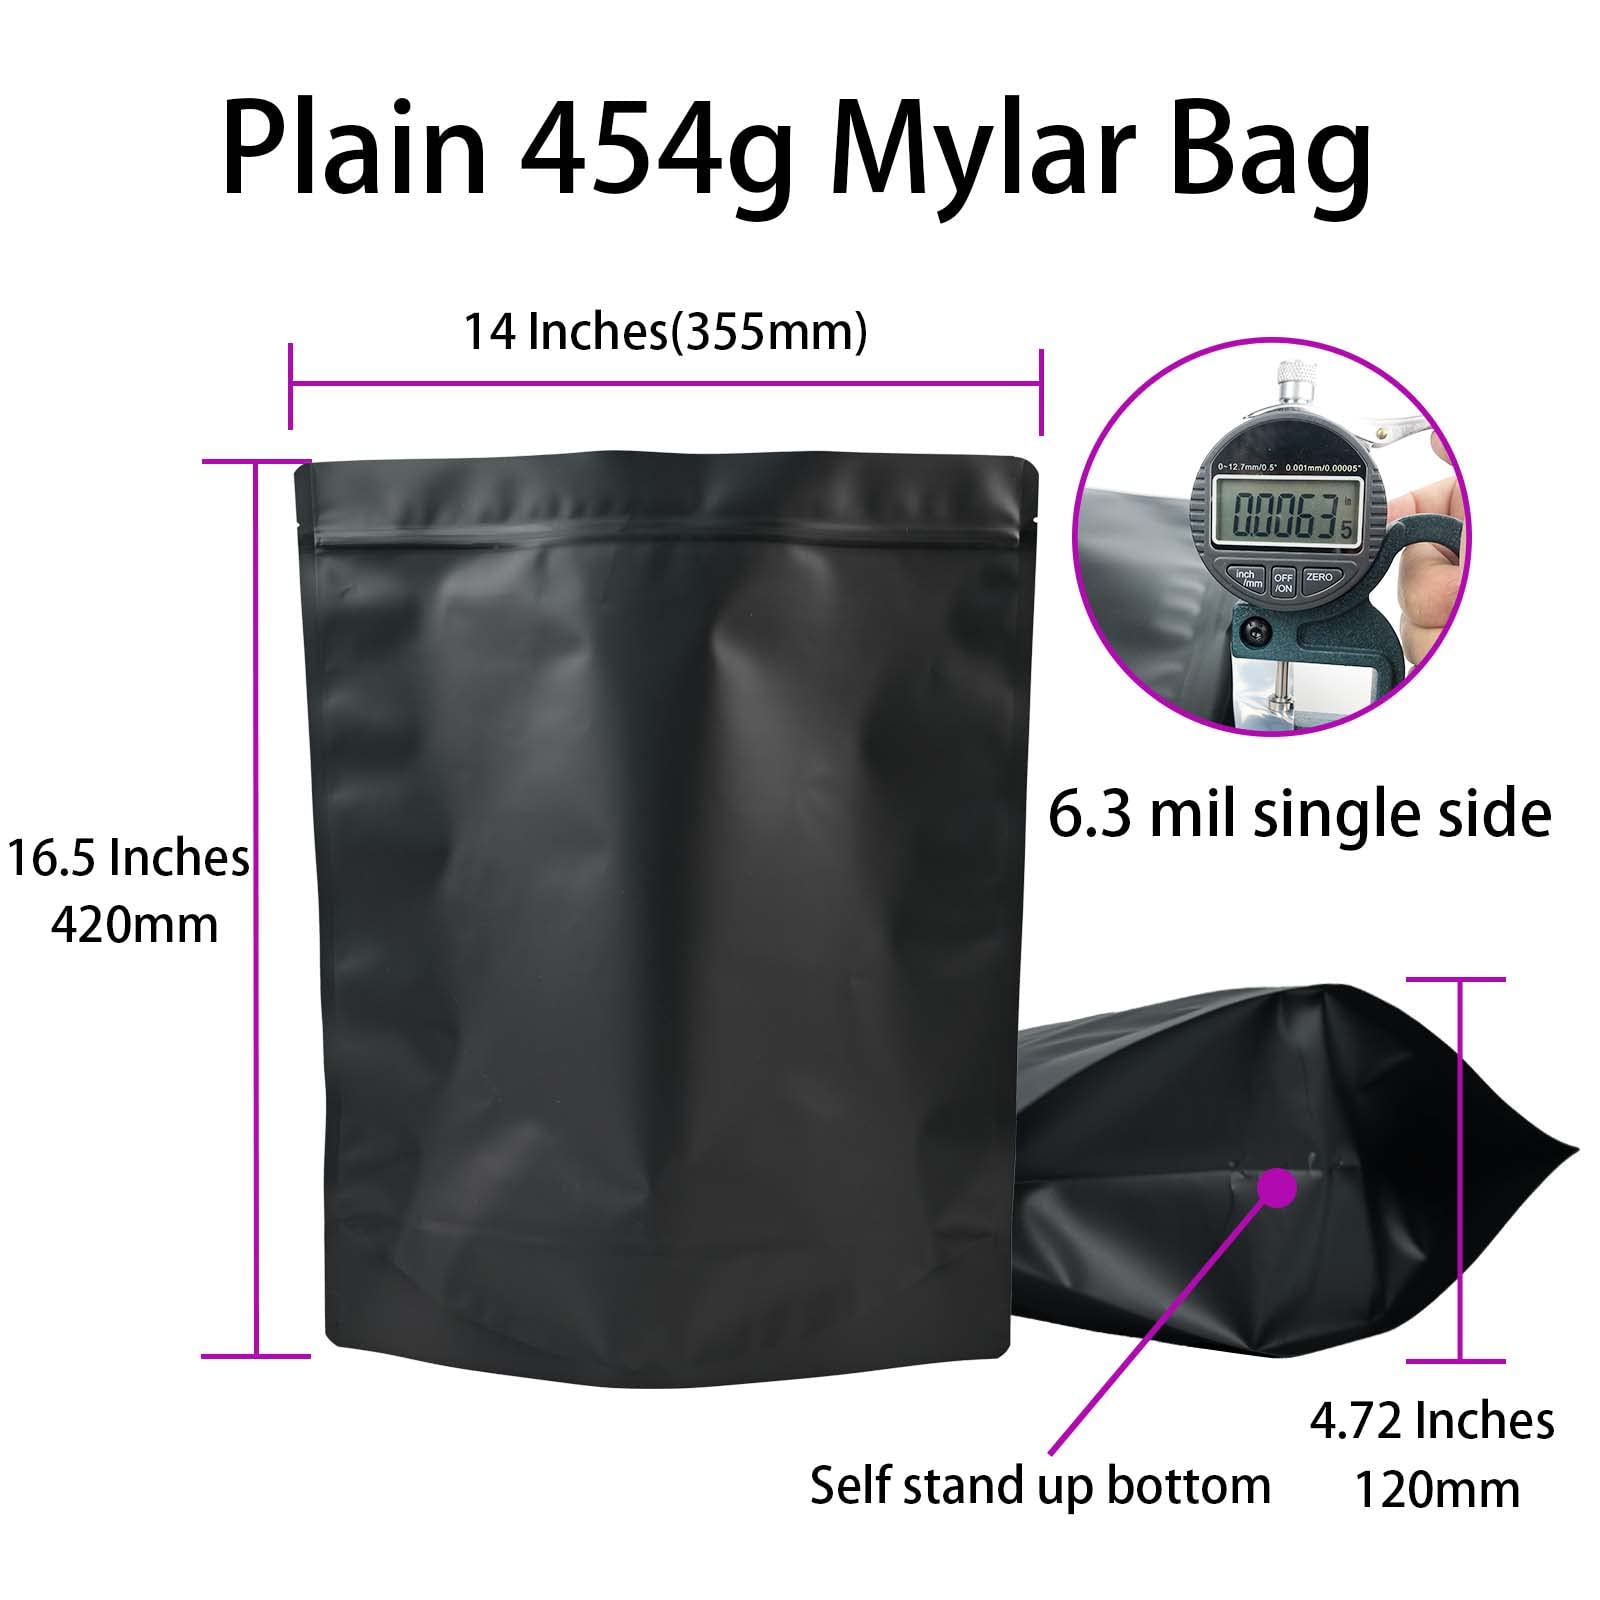 KHMSYOG 20 Pack Mylar Bag 1 LB,6.3 Mil Thickness Smell Proof Bag,Stand-up Packaging Pouch,Resealable Ziplock Foil Food Storage Baggies Safe Material,14x16.5 Inches,Matte Black